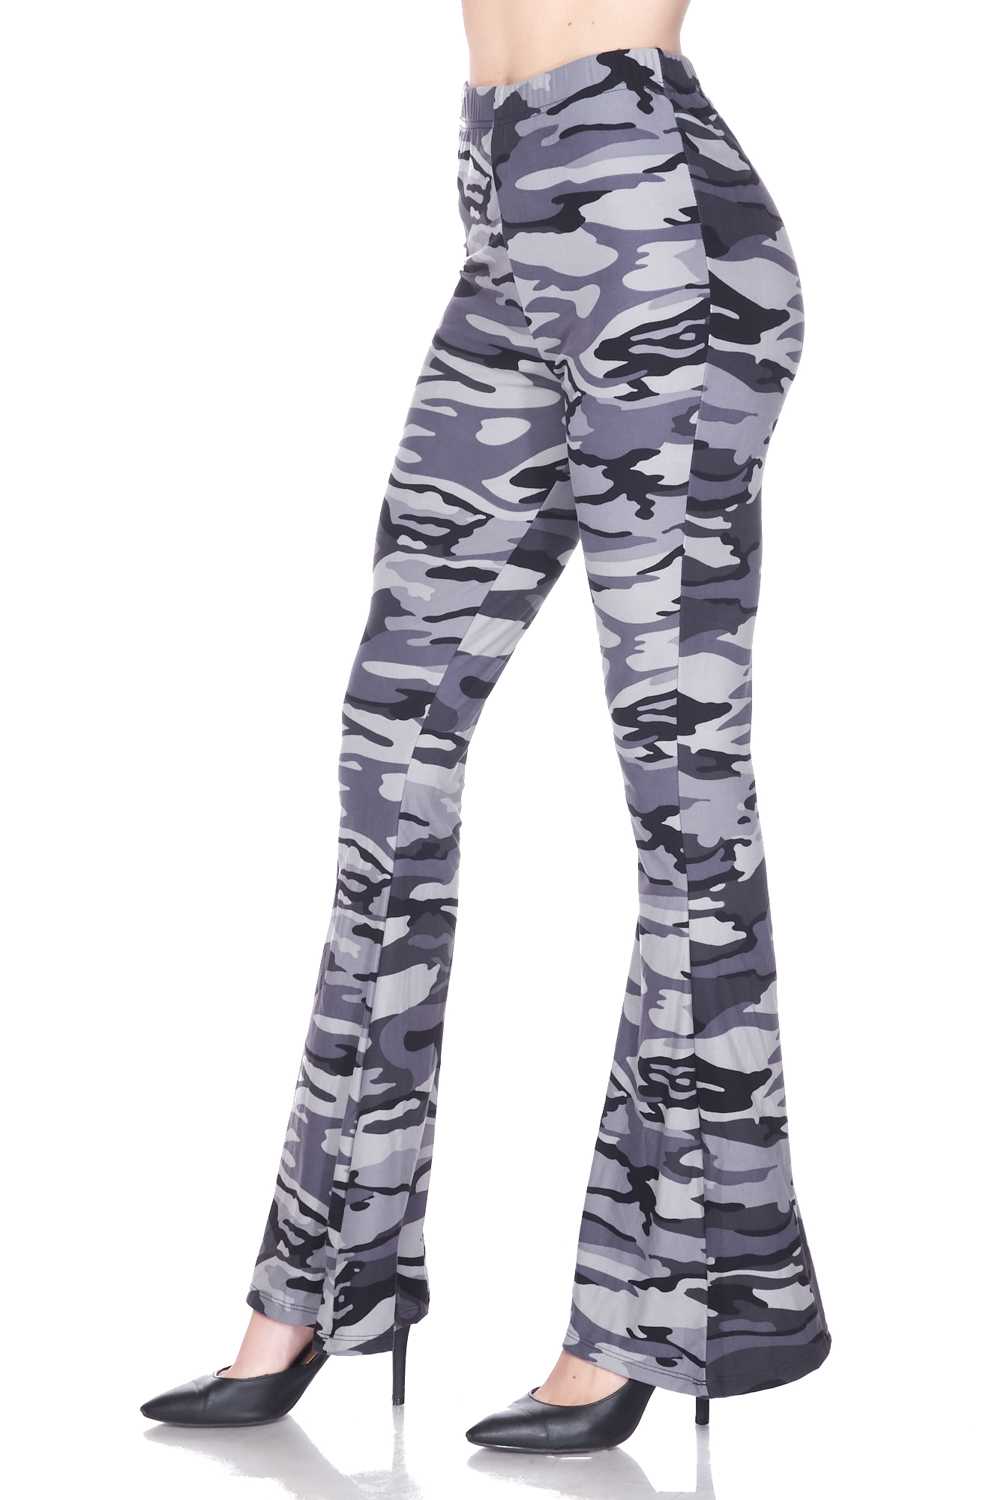 Wholesale Buttery Smooth Charcoal Camouflage Bell Bottom Leggings